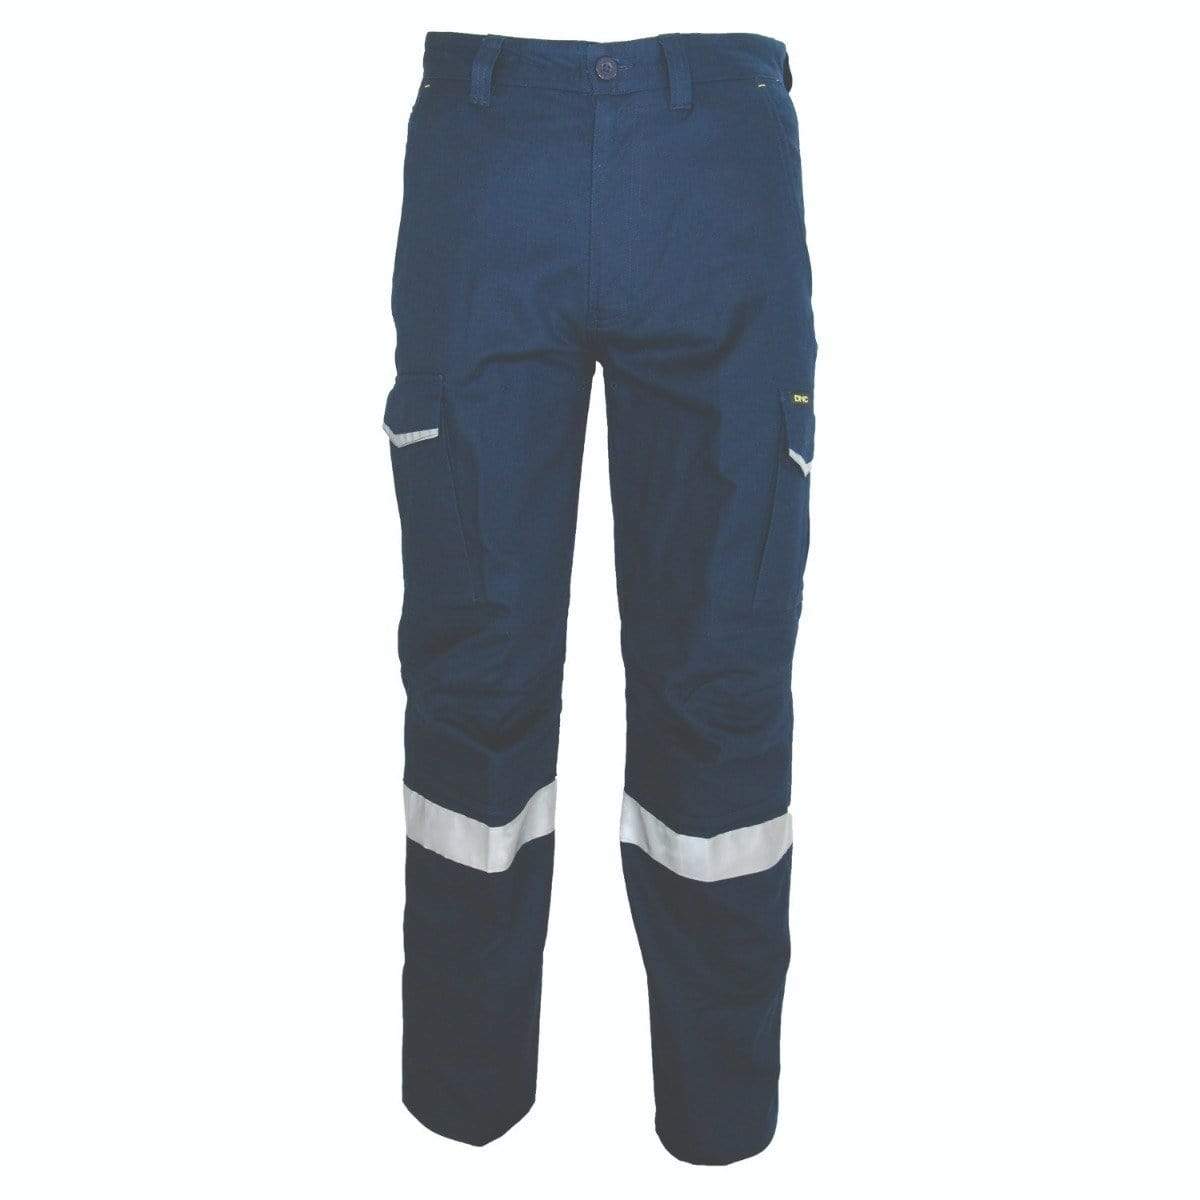 Dnc Workwear Ripstop Cargo Pants With Csr Reflective Tapes - 3386 Work Wear DNC Workwear Navy 77R 